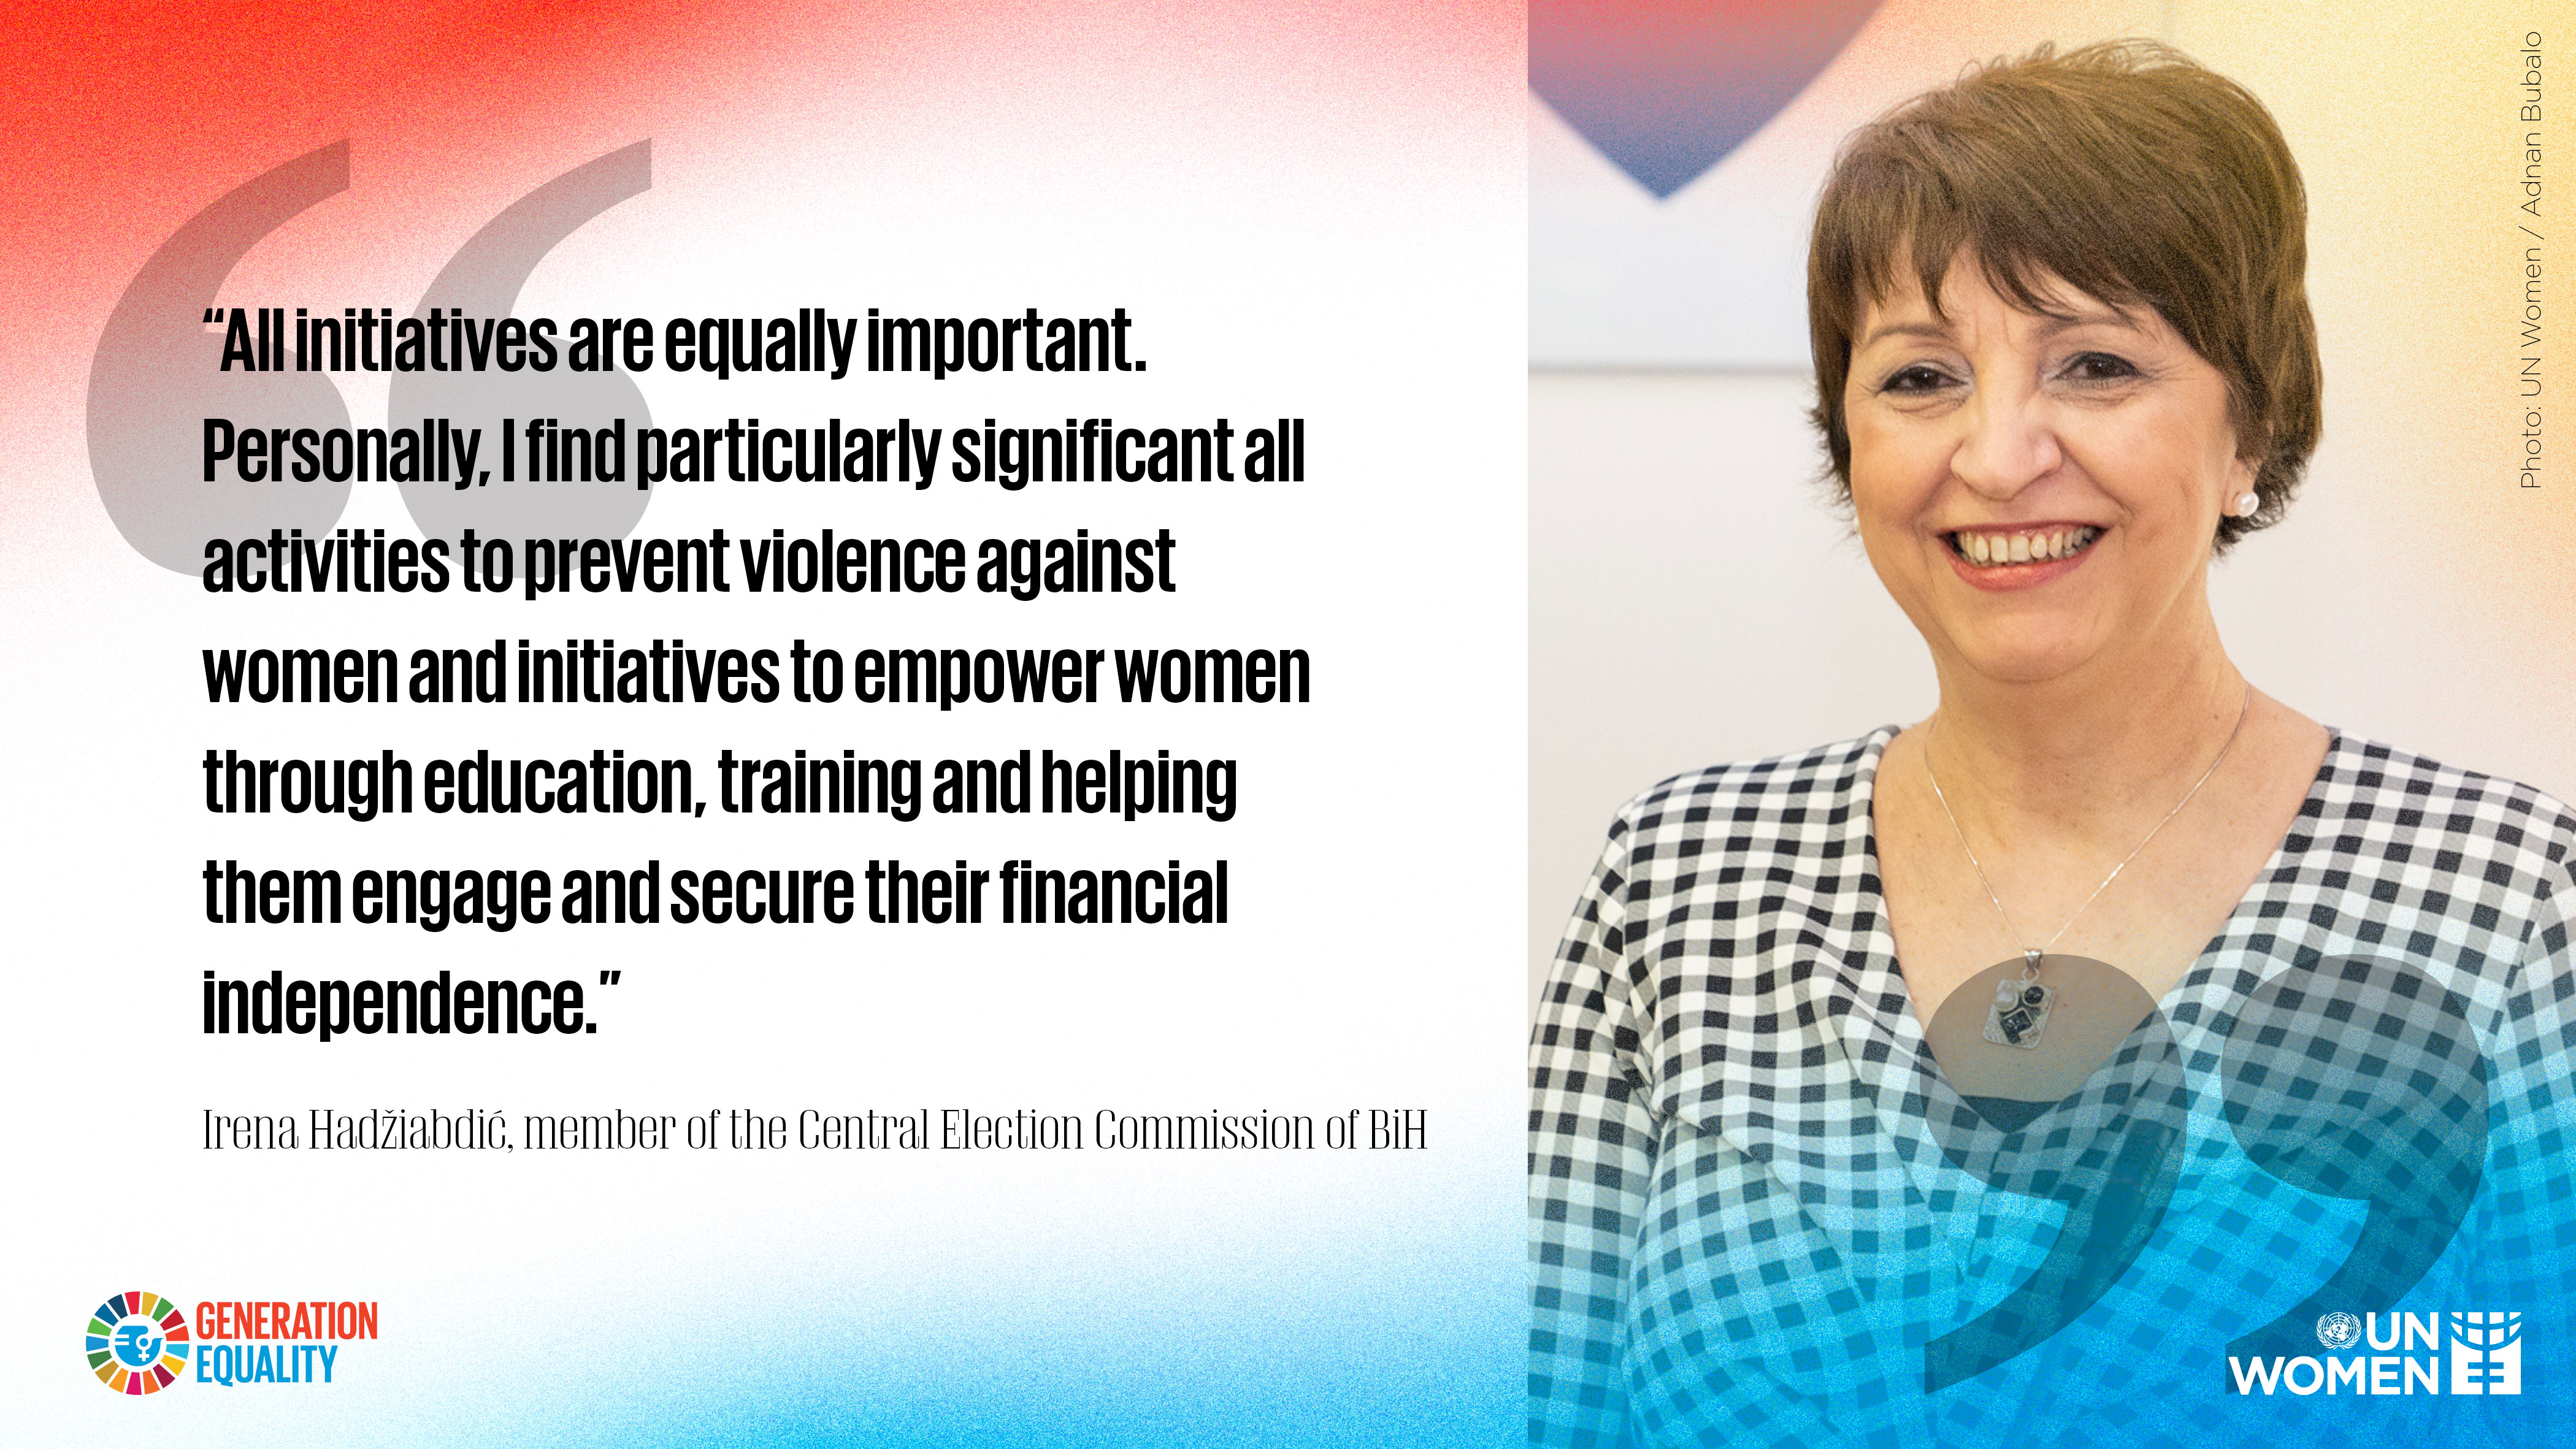 It is important to empower women and strive to ensure their financial independence 